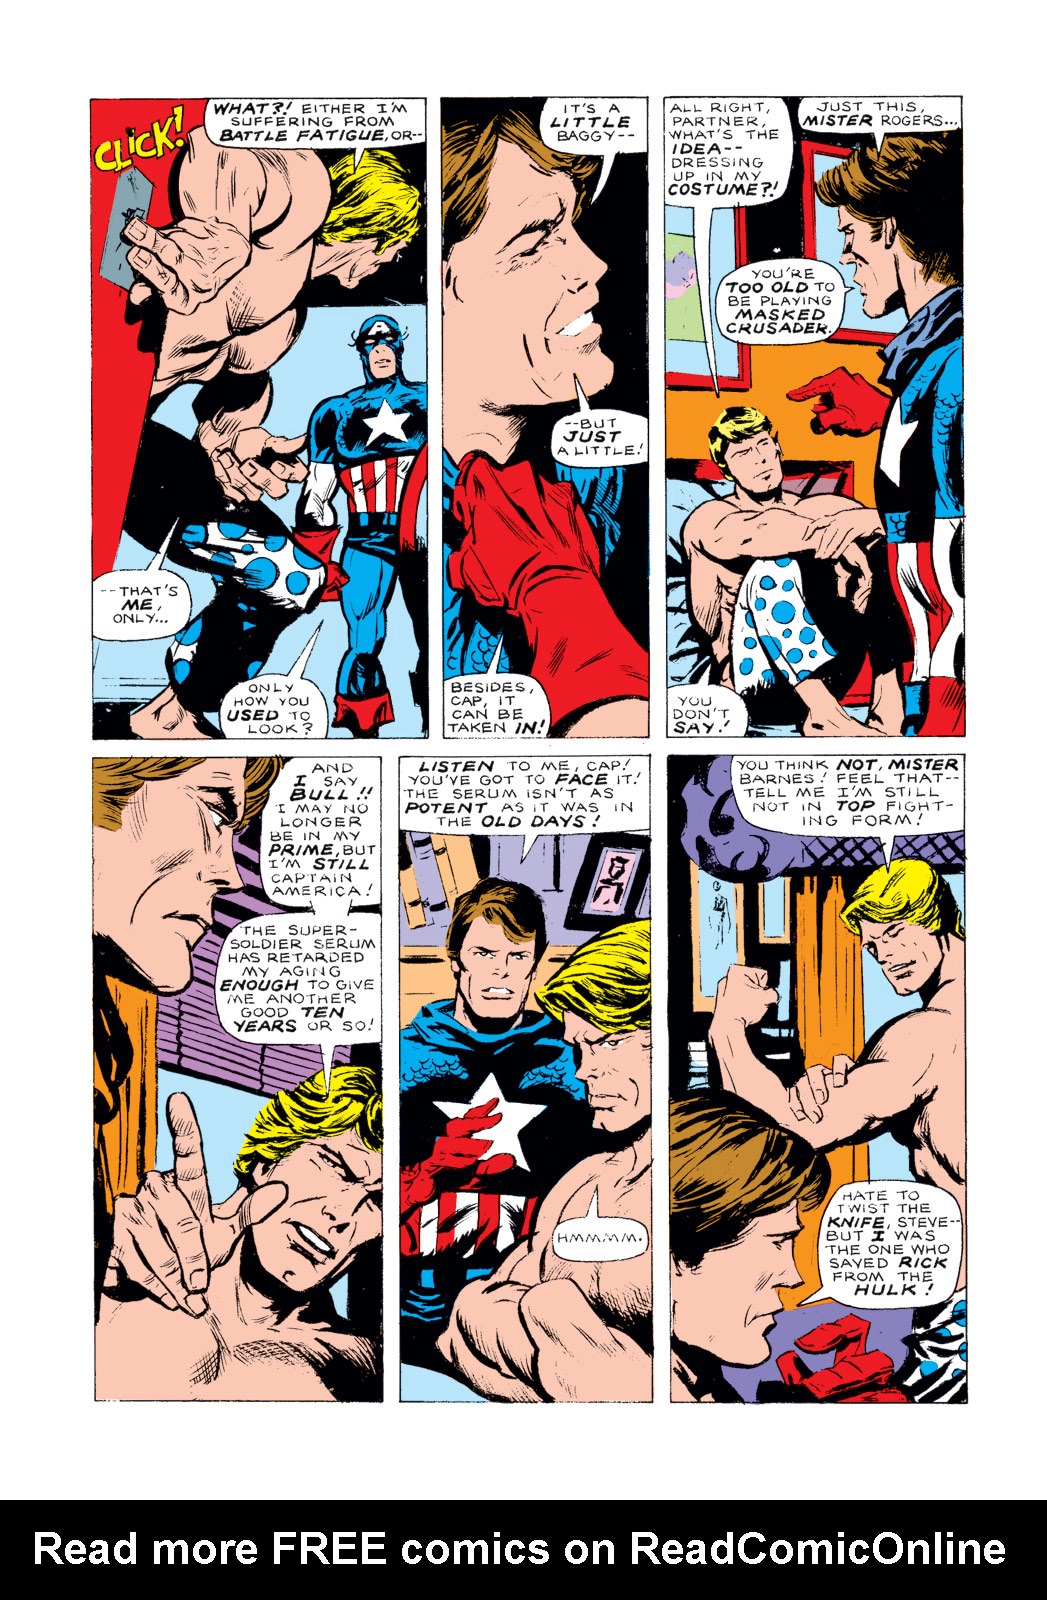 What If? (1977) issue 5 - Captain America hadn't vanished during World War Two - Page 18